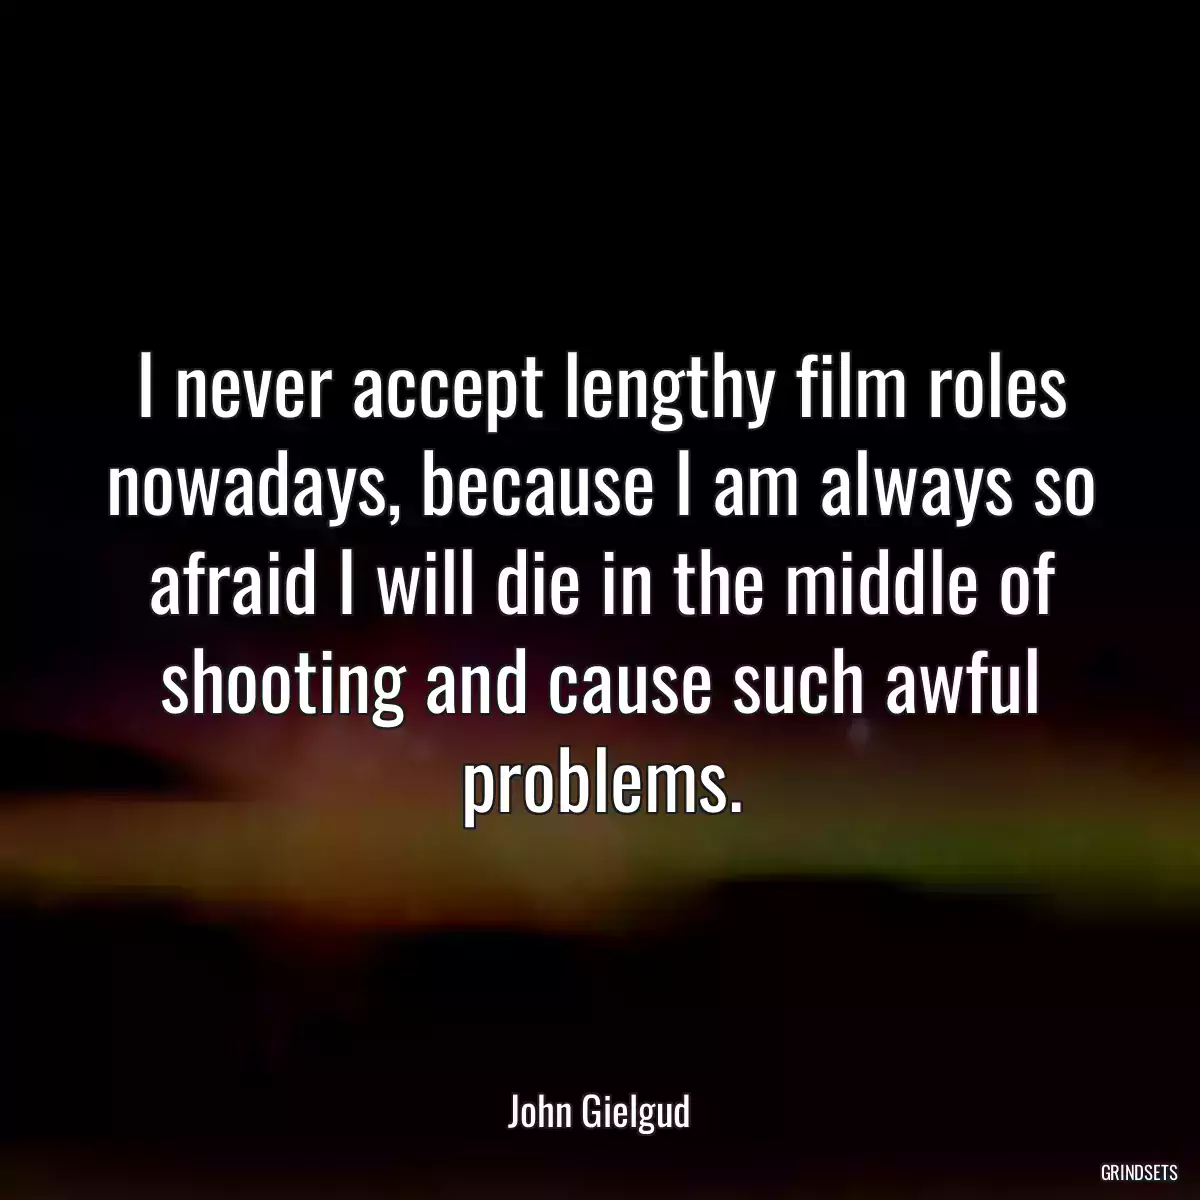 I never accept lengthy film roles nowadays, because I am always so afraid I will die in the middle of shooting and cause such awful problems.